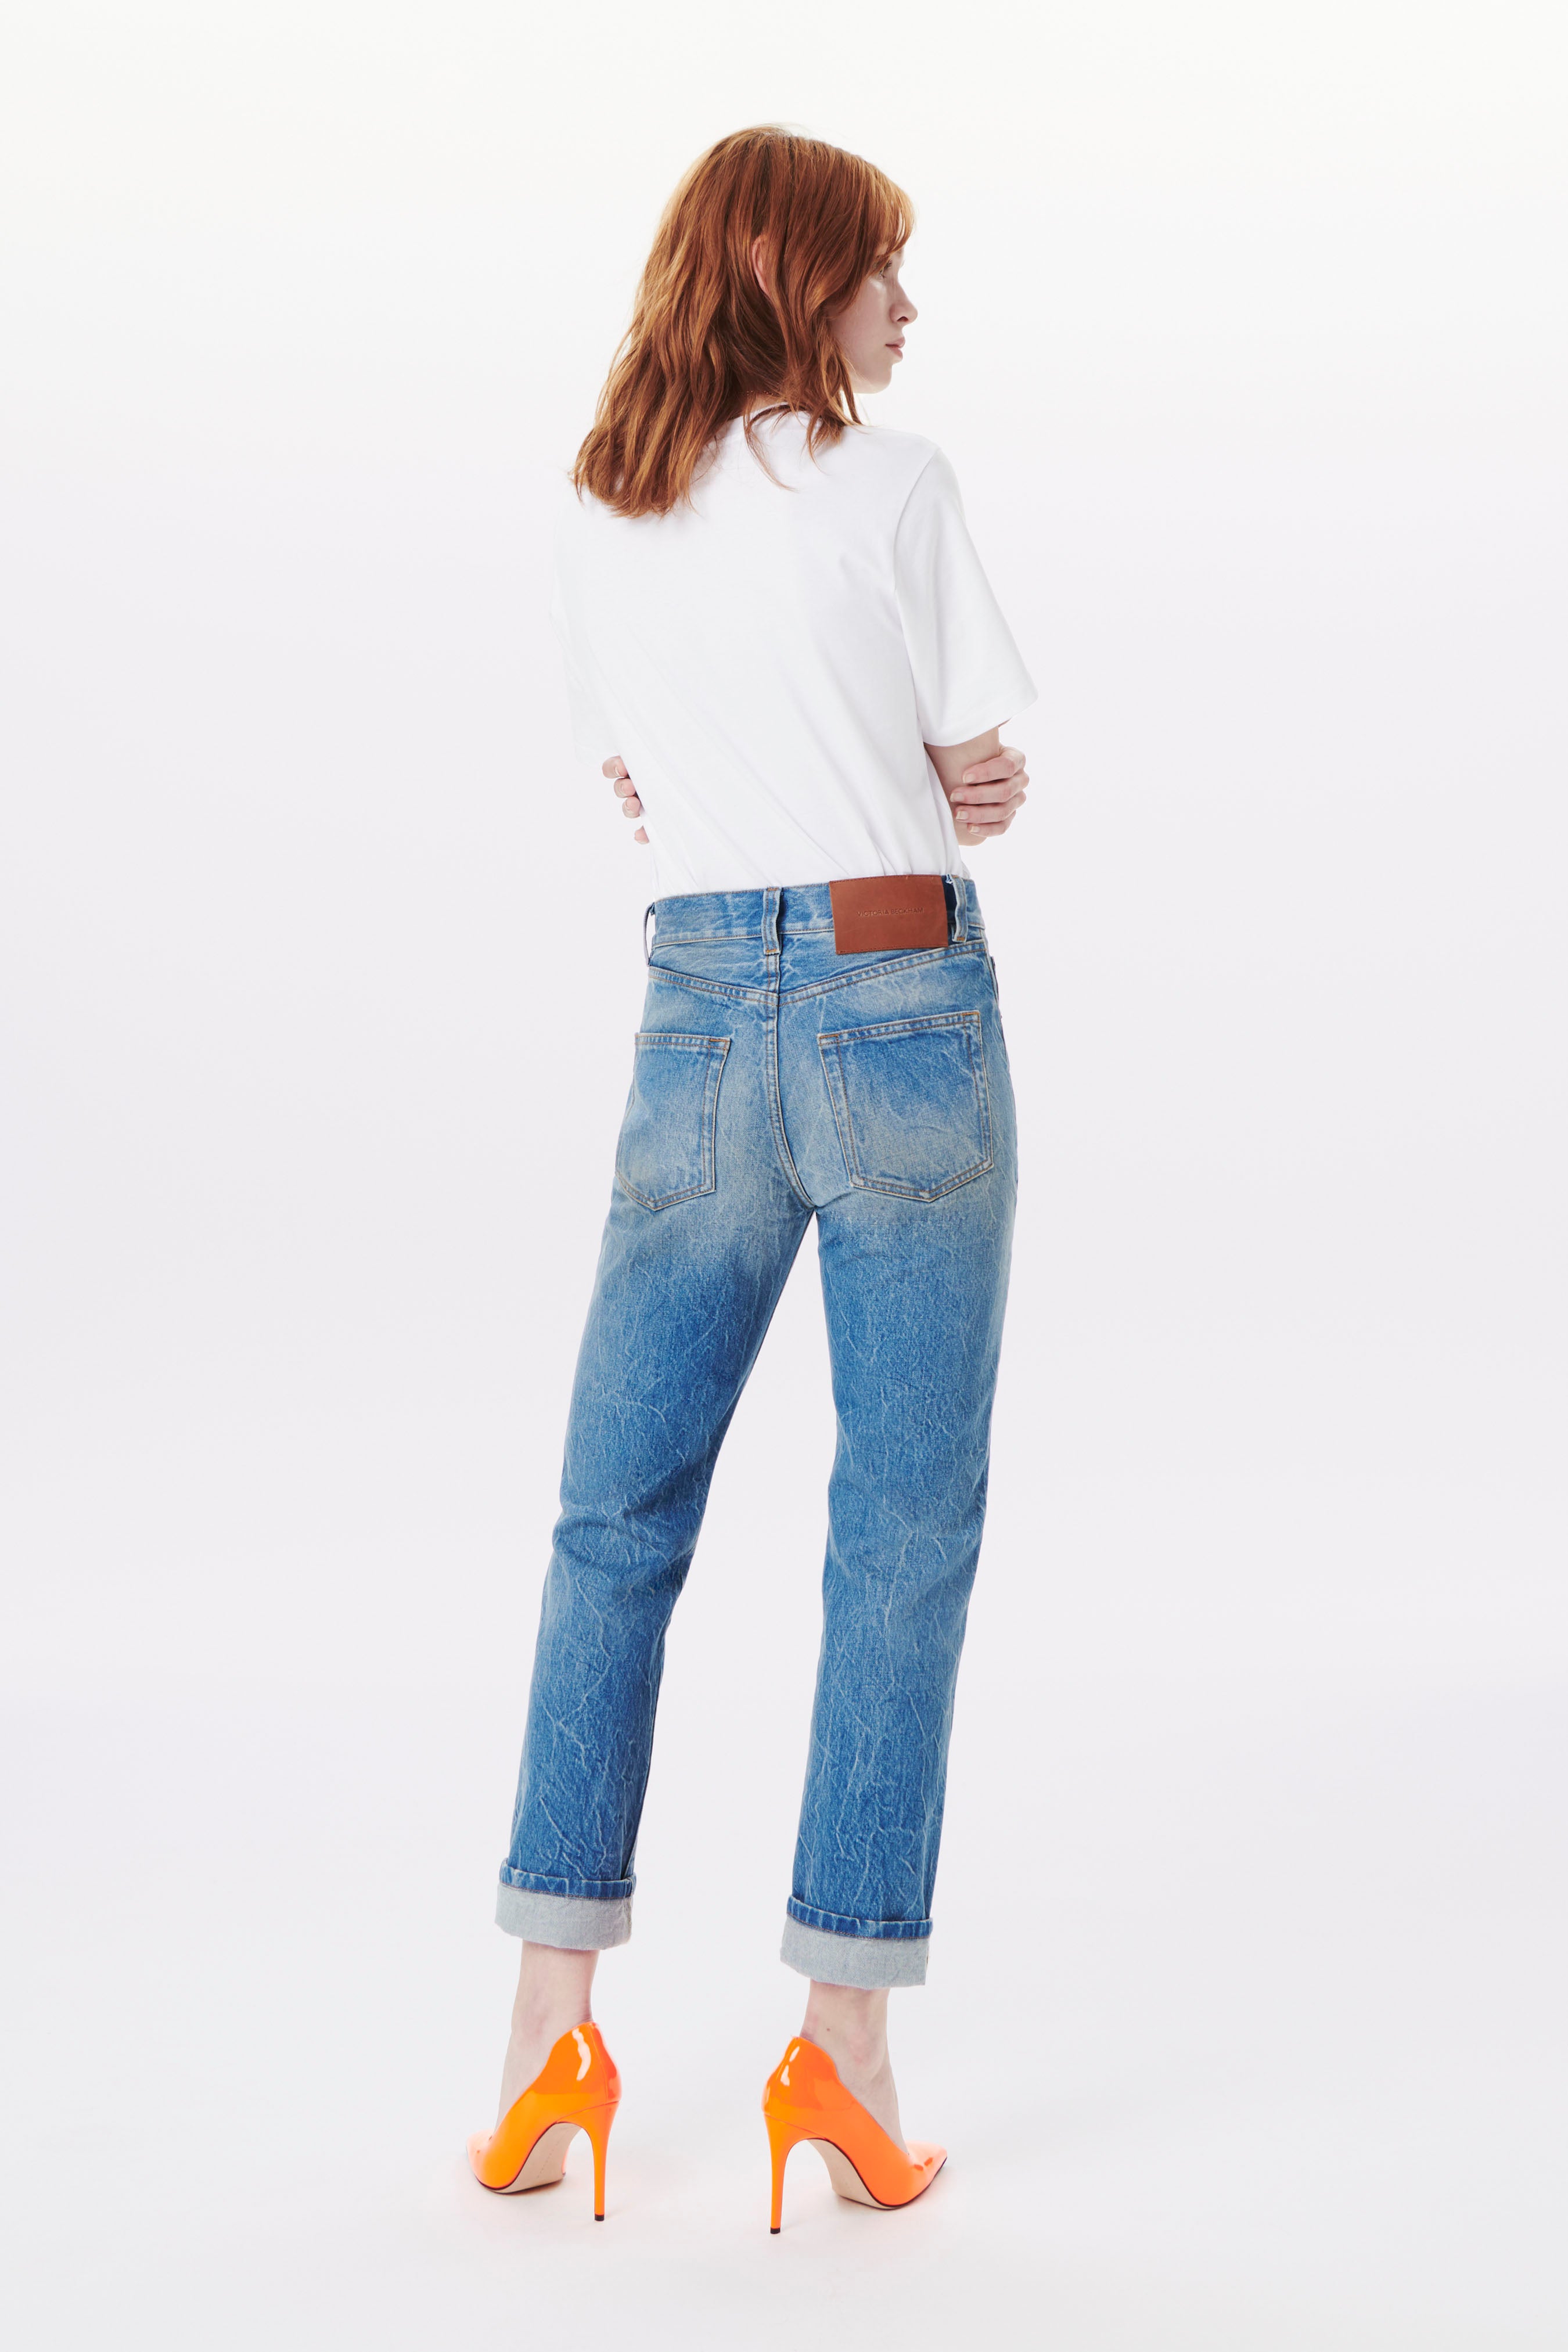 The button fly Jeans. – Tailored Jeans's BLOG